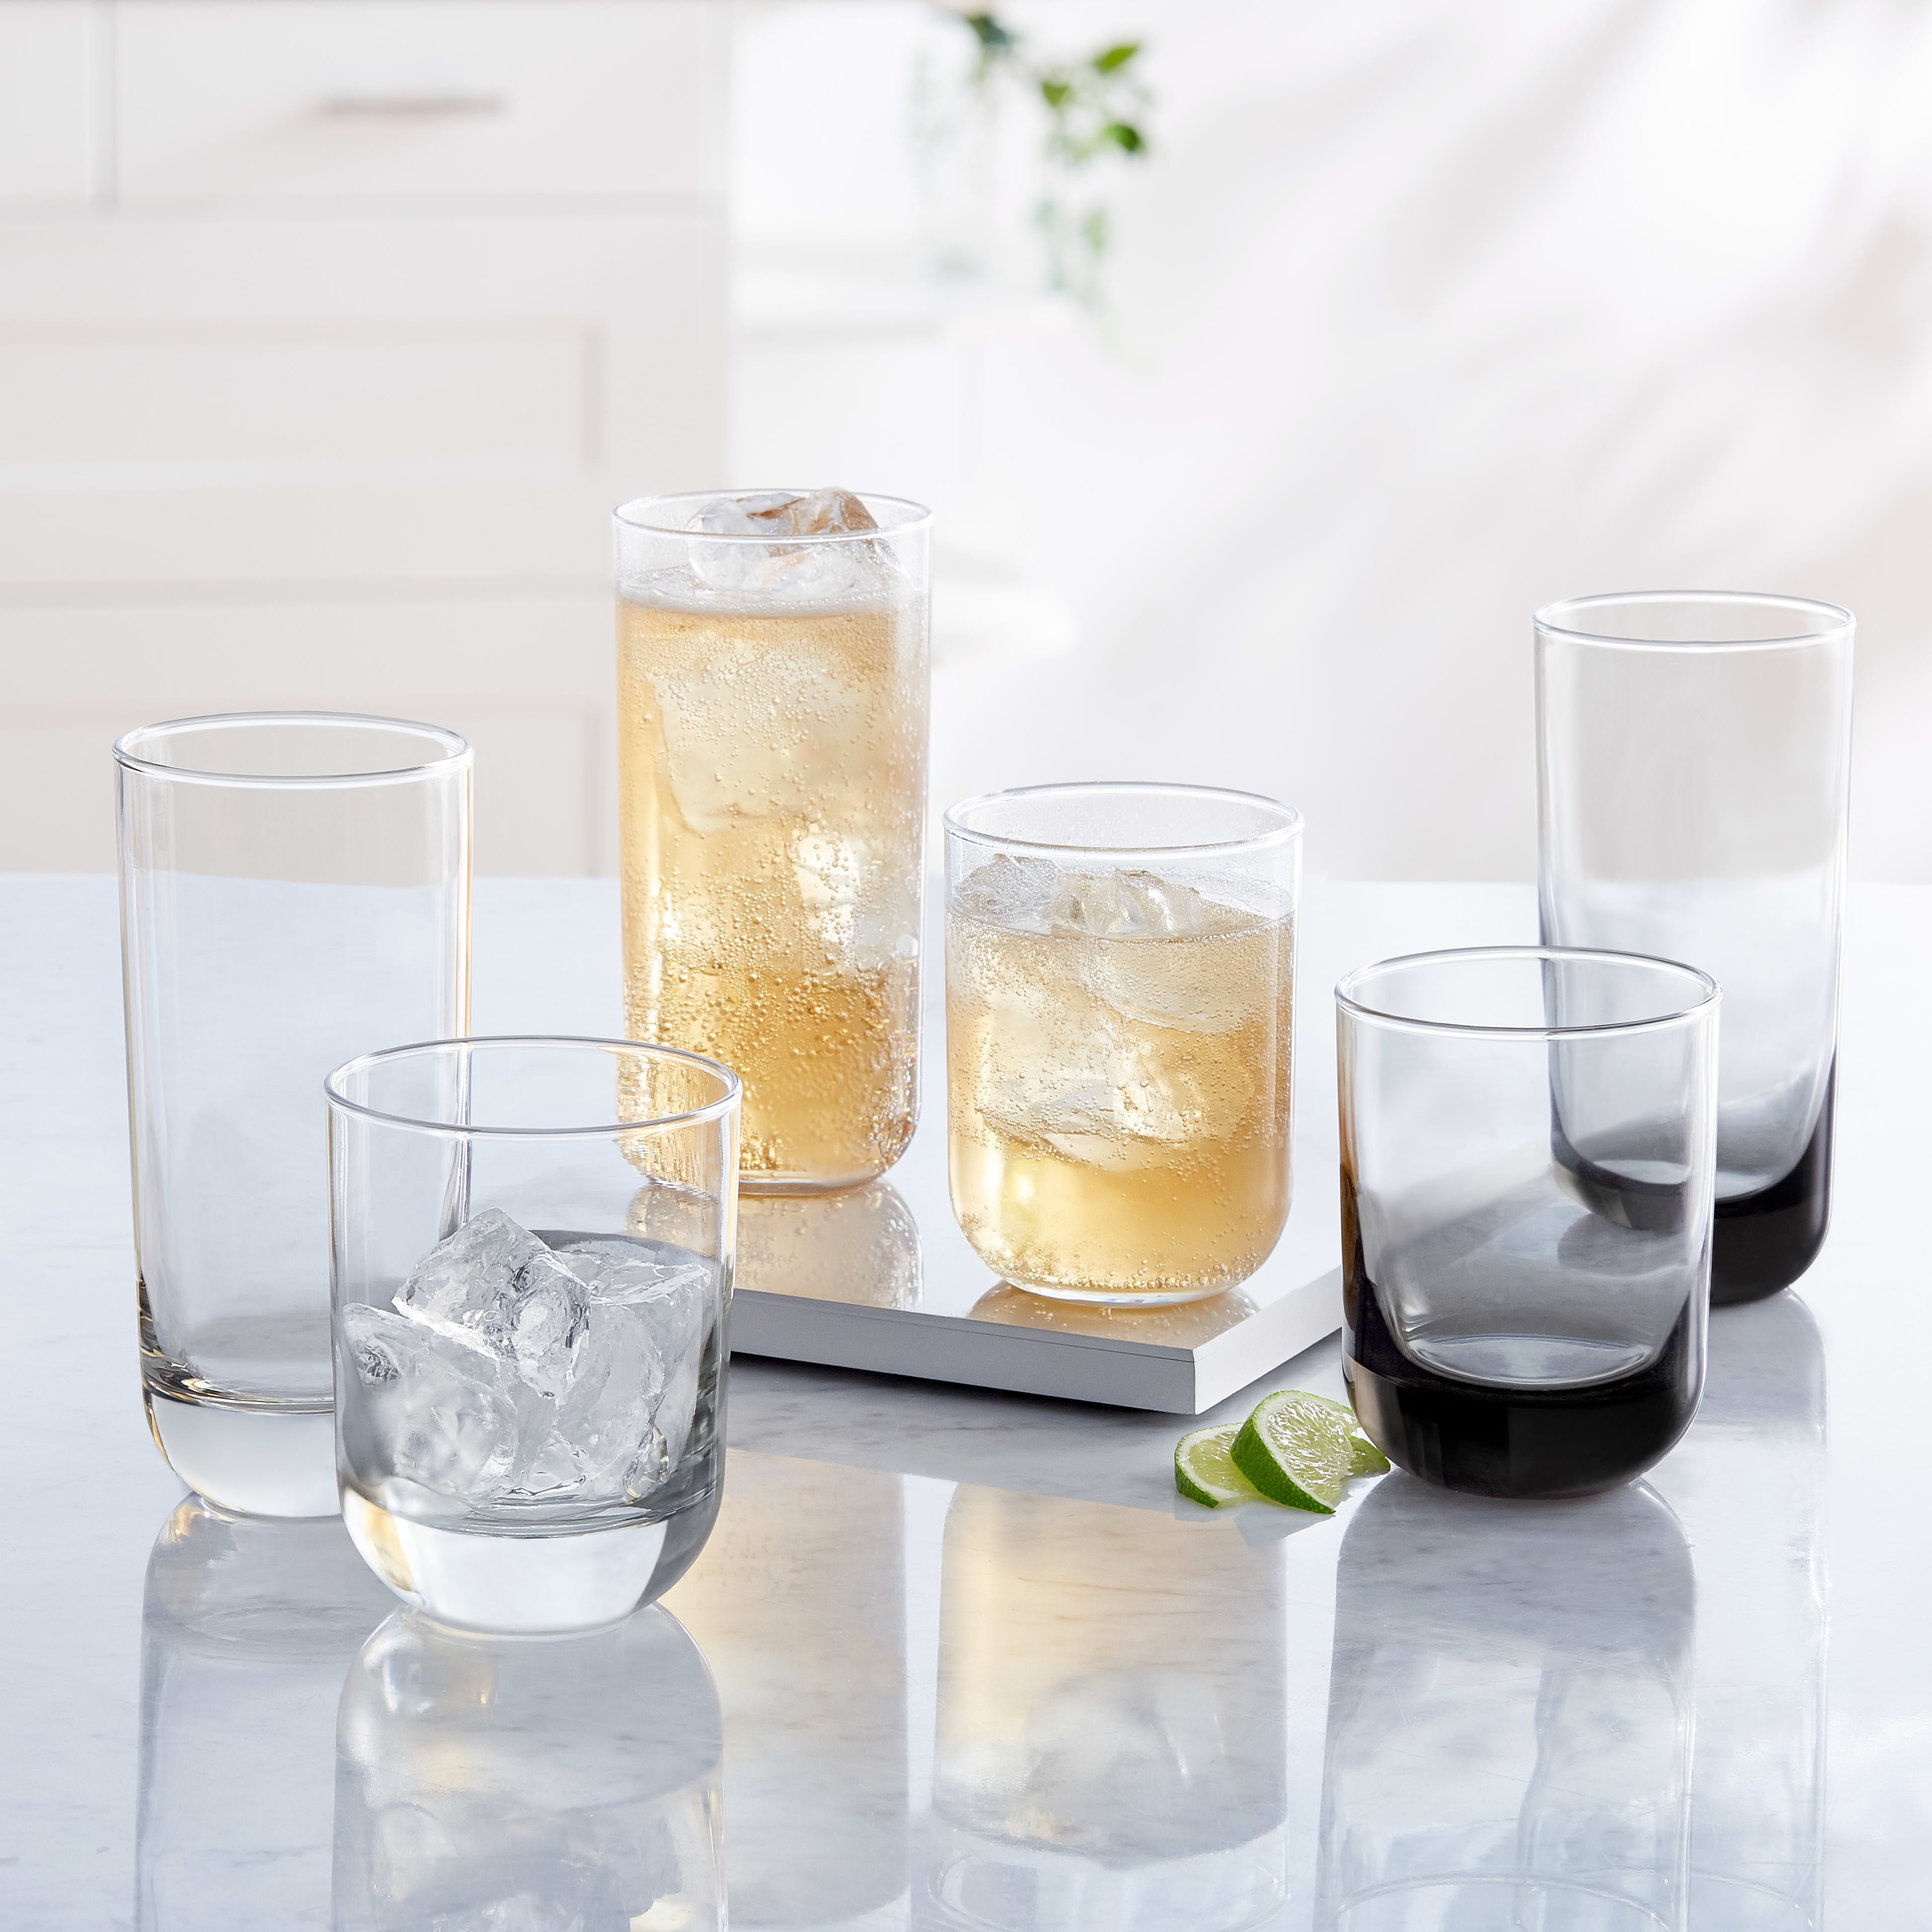 Libbey 16 oz Drinking Glasses Tumblers Set Of 4 Rings / Ribbed Clear Glass